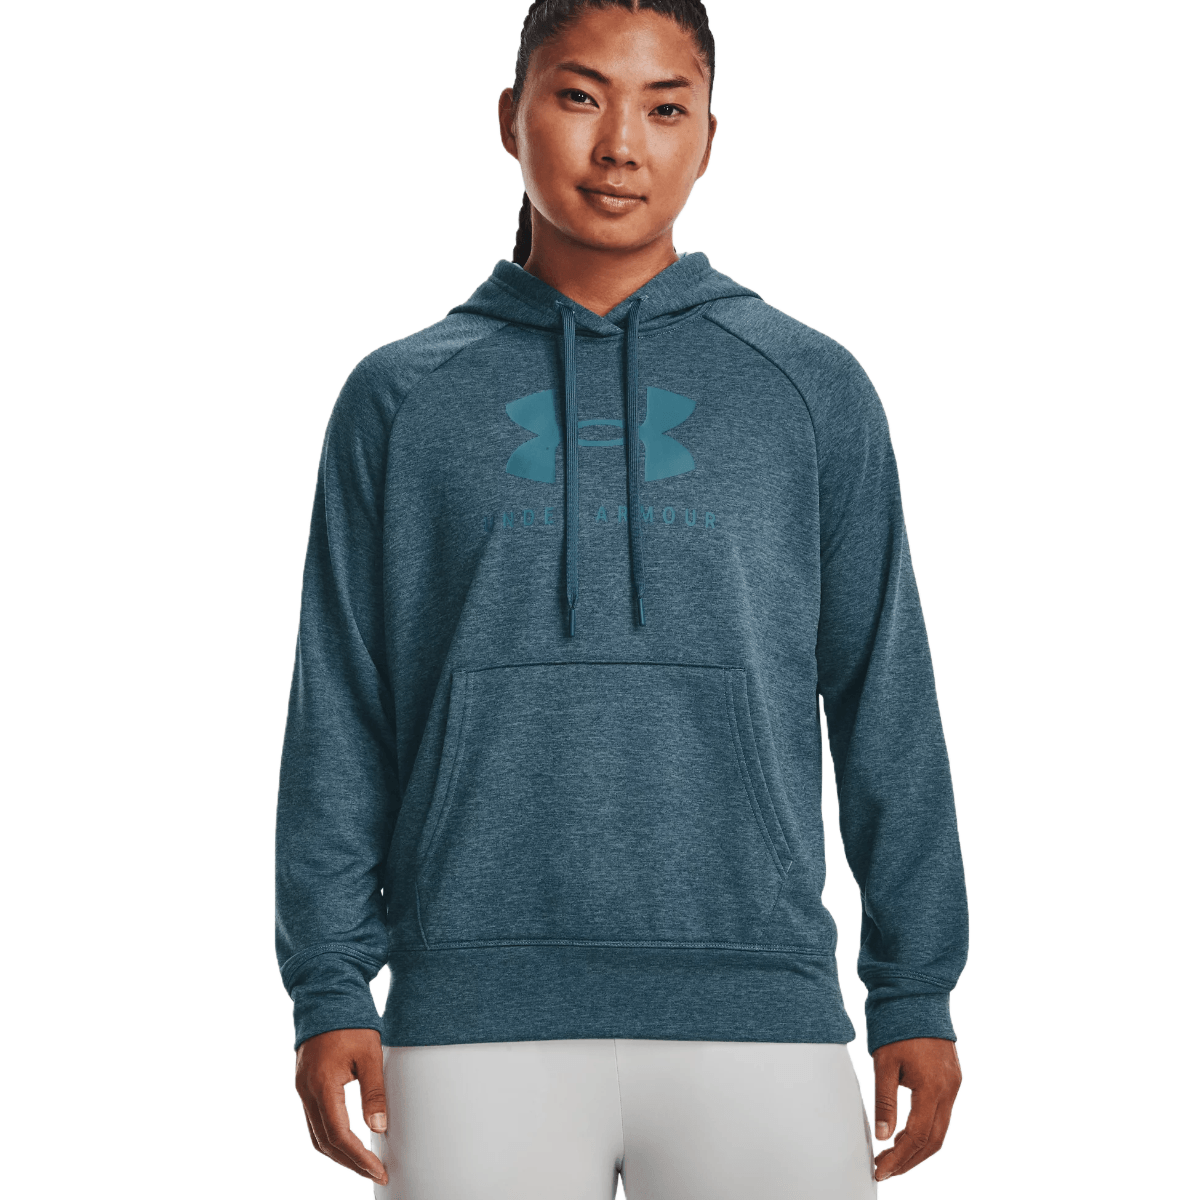 Under Armour Shoreline Terry Hoodie - Women's - Al's Sporting Goods: Your  One-Stop Shop for Outdoor Sports Gear & Apparel